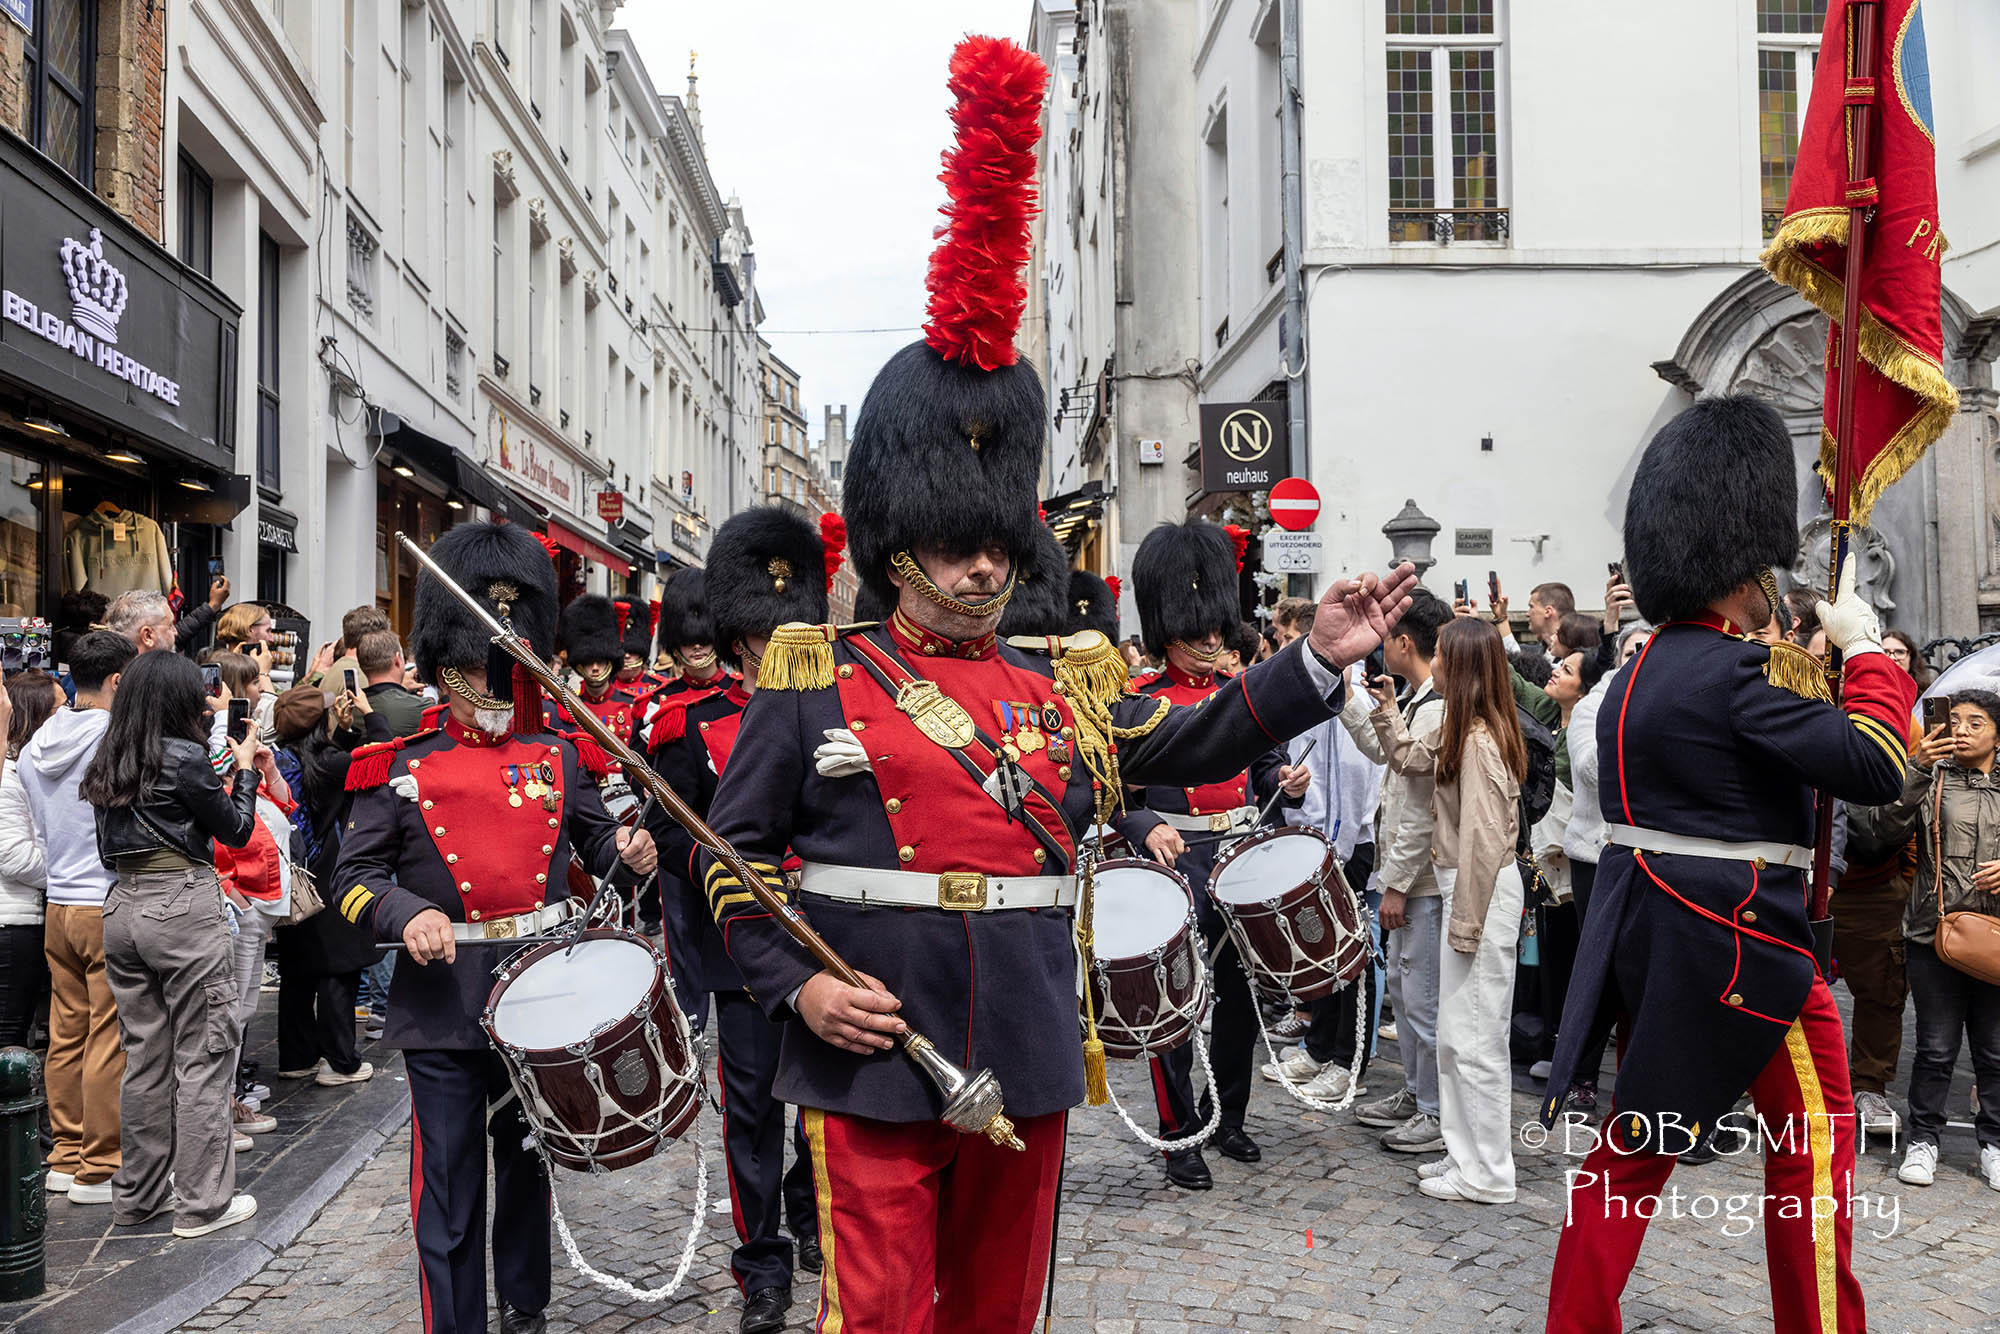 Members of la compagnie royale des Anciens Arquebusier de Visé, a traditional guild, parade to celebrate the clothing of the Brussels Manneken-Pis in their uniform as part of the association’s 450th anniversary